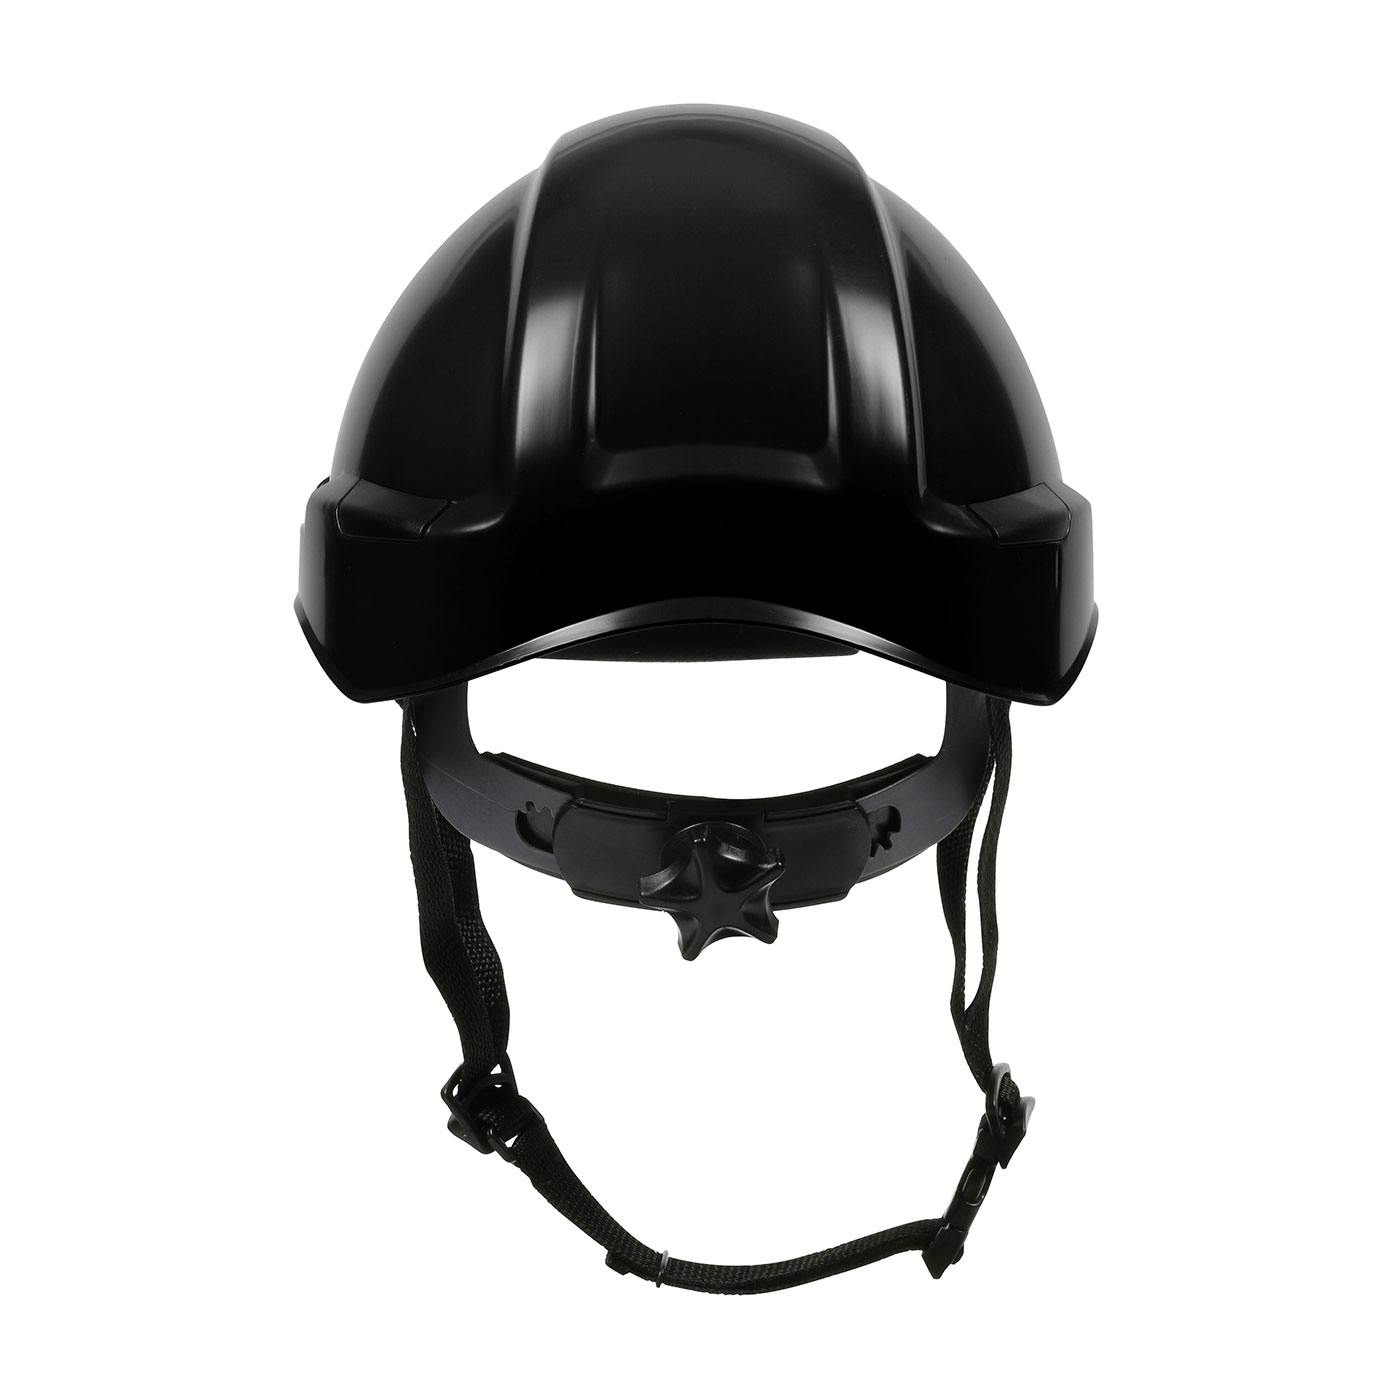 Rocky™ Industrial Climbing Helmet with Polycarbonate / ABS Shell, Hi-Density Foam Impact Liner, Nylon Suspension, Wheel Ratchet Adjustment and 4-Point Chin Strap (280-HP142R)